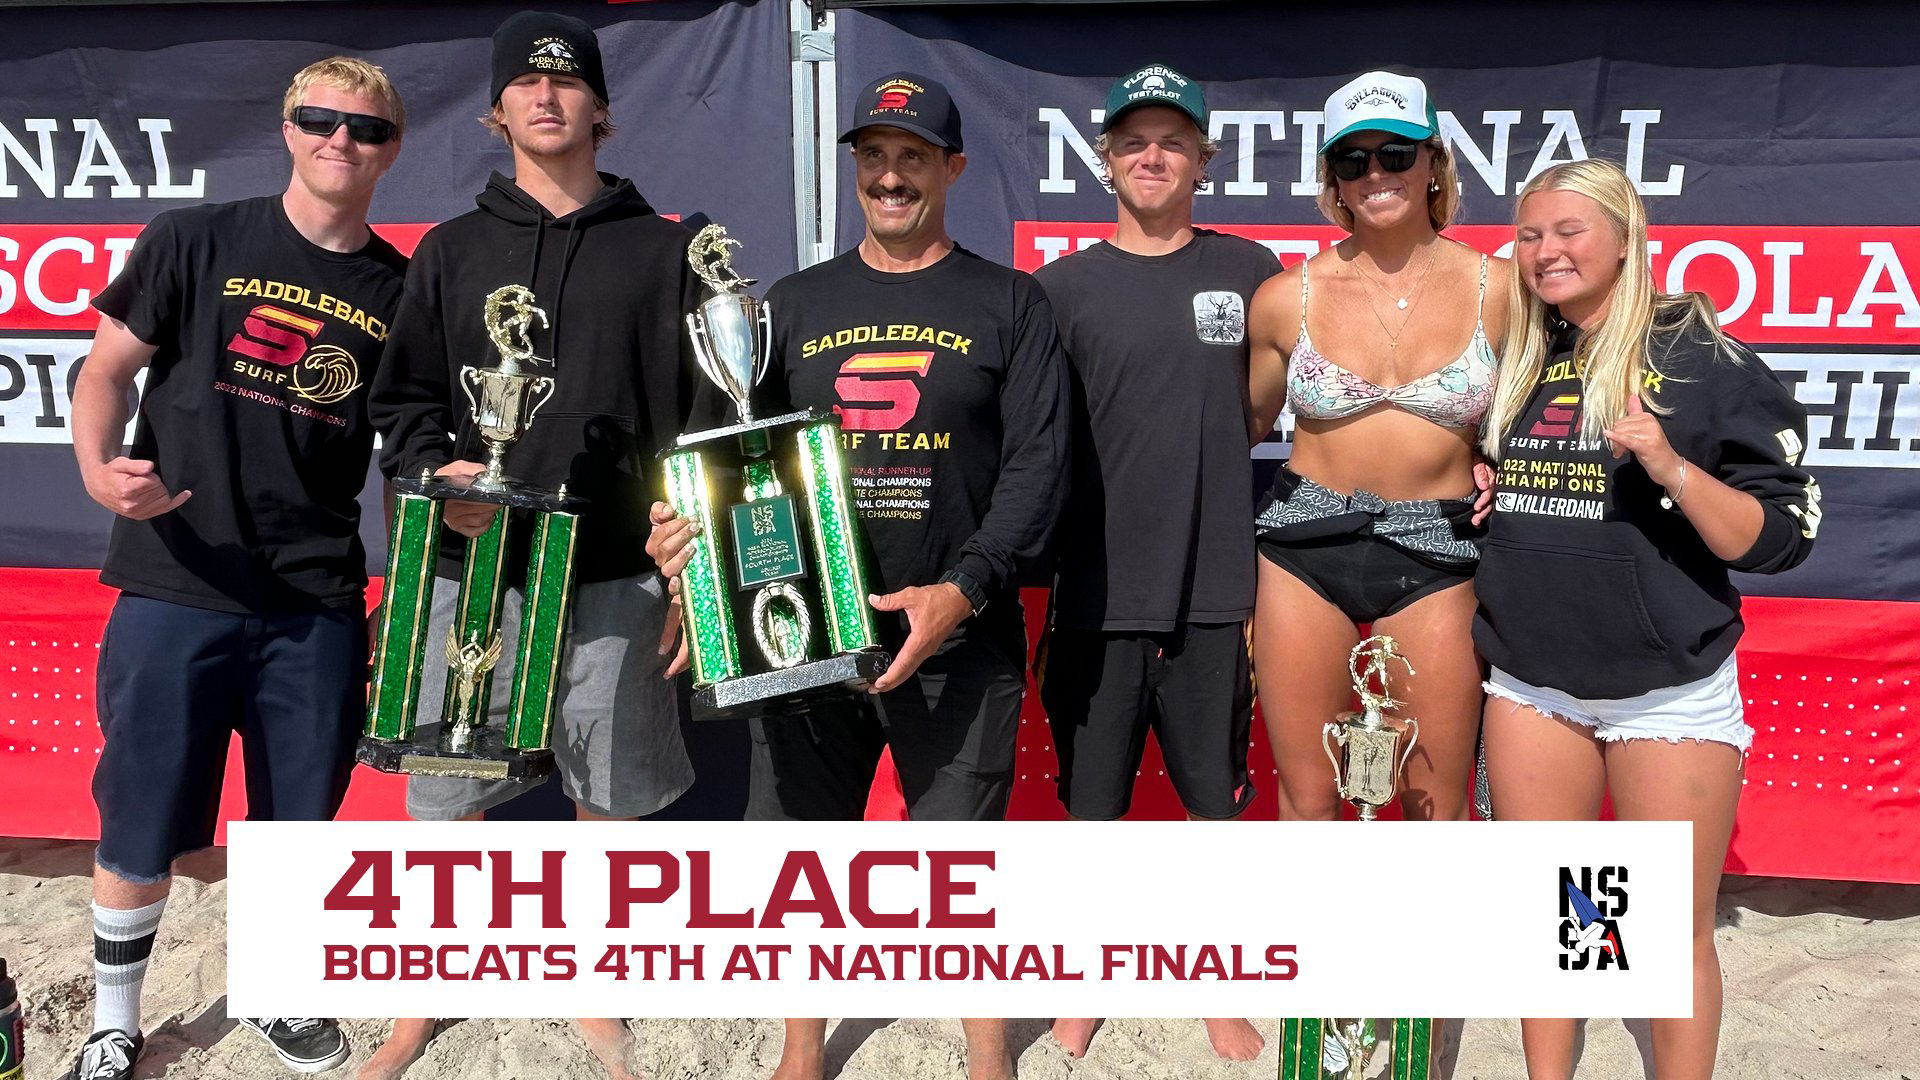 Surf finishes 4th at NSSA Finals